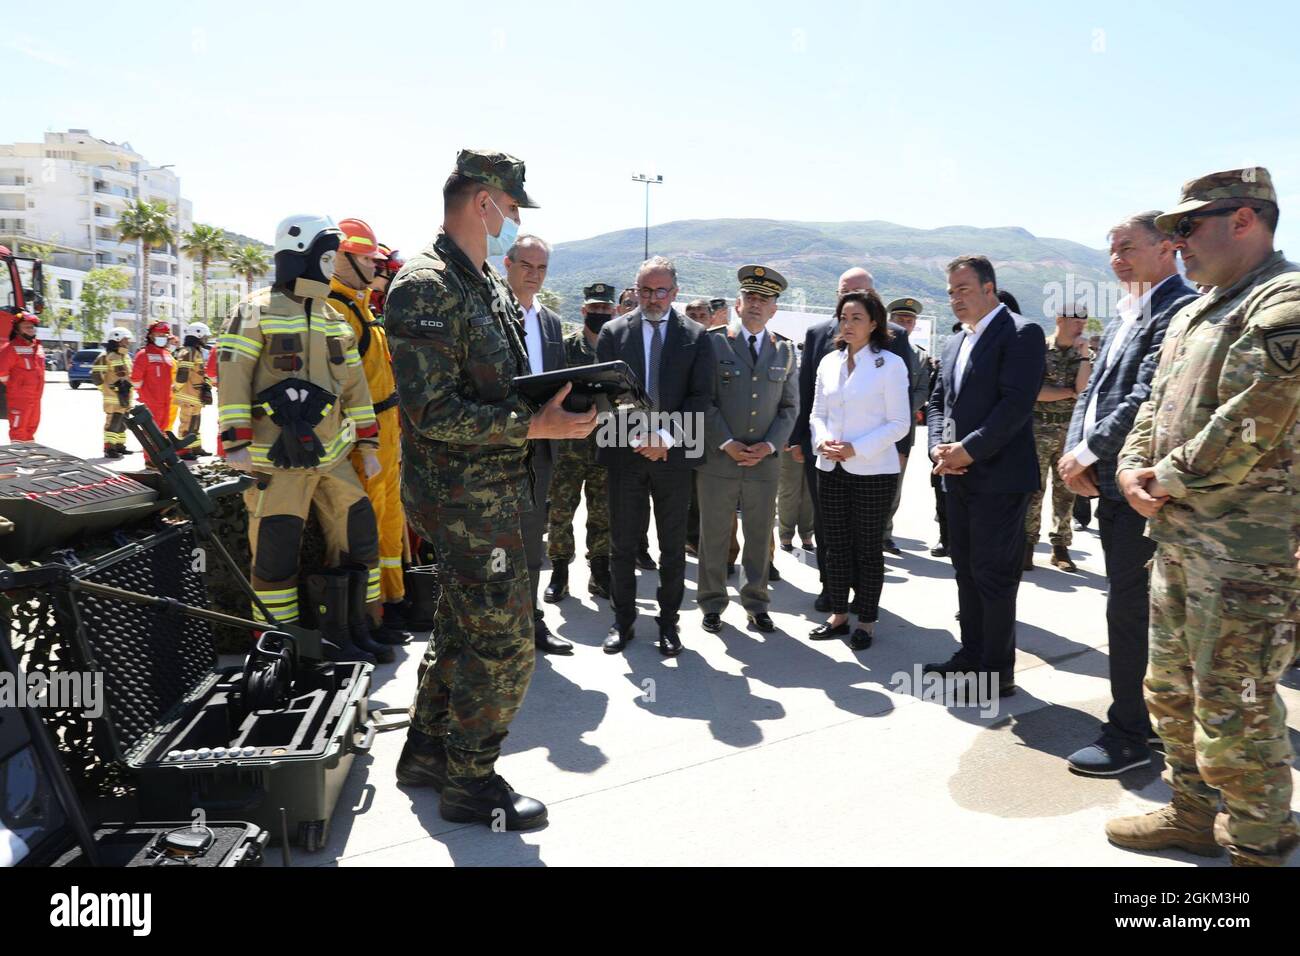 The Albanian Armed Forces Explosive Ordnance Disposal (EOD) unit briefs U.S. Ambassador to Albania Yuri Kim on  U.S.-donated equipment May 22, 2021, at a military sponsored open house in Vlore, Albania, held as part of DEFENDER-Europe 21 activities.  During the event, U.S. Ambassador to Albania Yuri Kim was briefed on the equipment and the continued U.S. commitment to peace and security in Albania, which includes decontamination of landmine and unexploded ordnance sites left over from previous conflict here. DEFENDER-Europe 21 is a large-scale U.S. Army-led exercise designed to build readiness Stock Photo